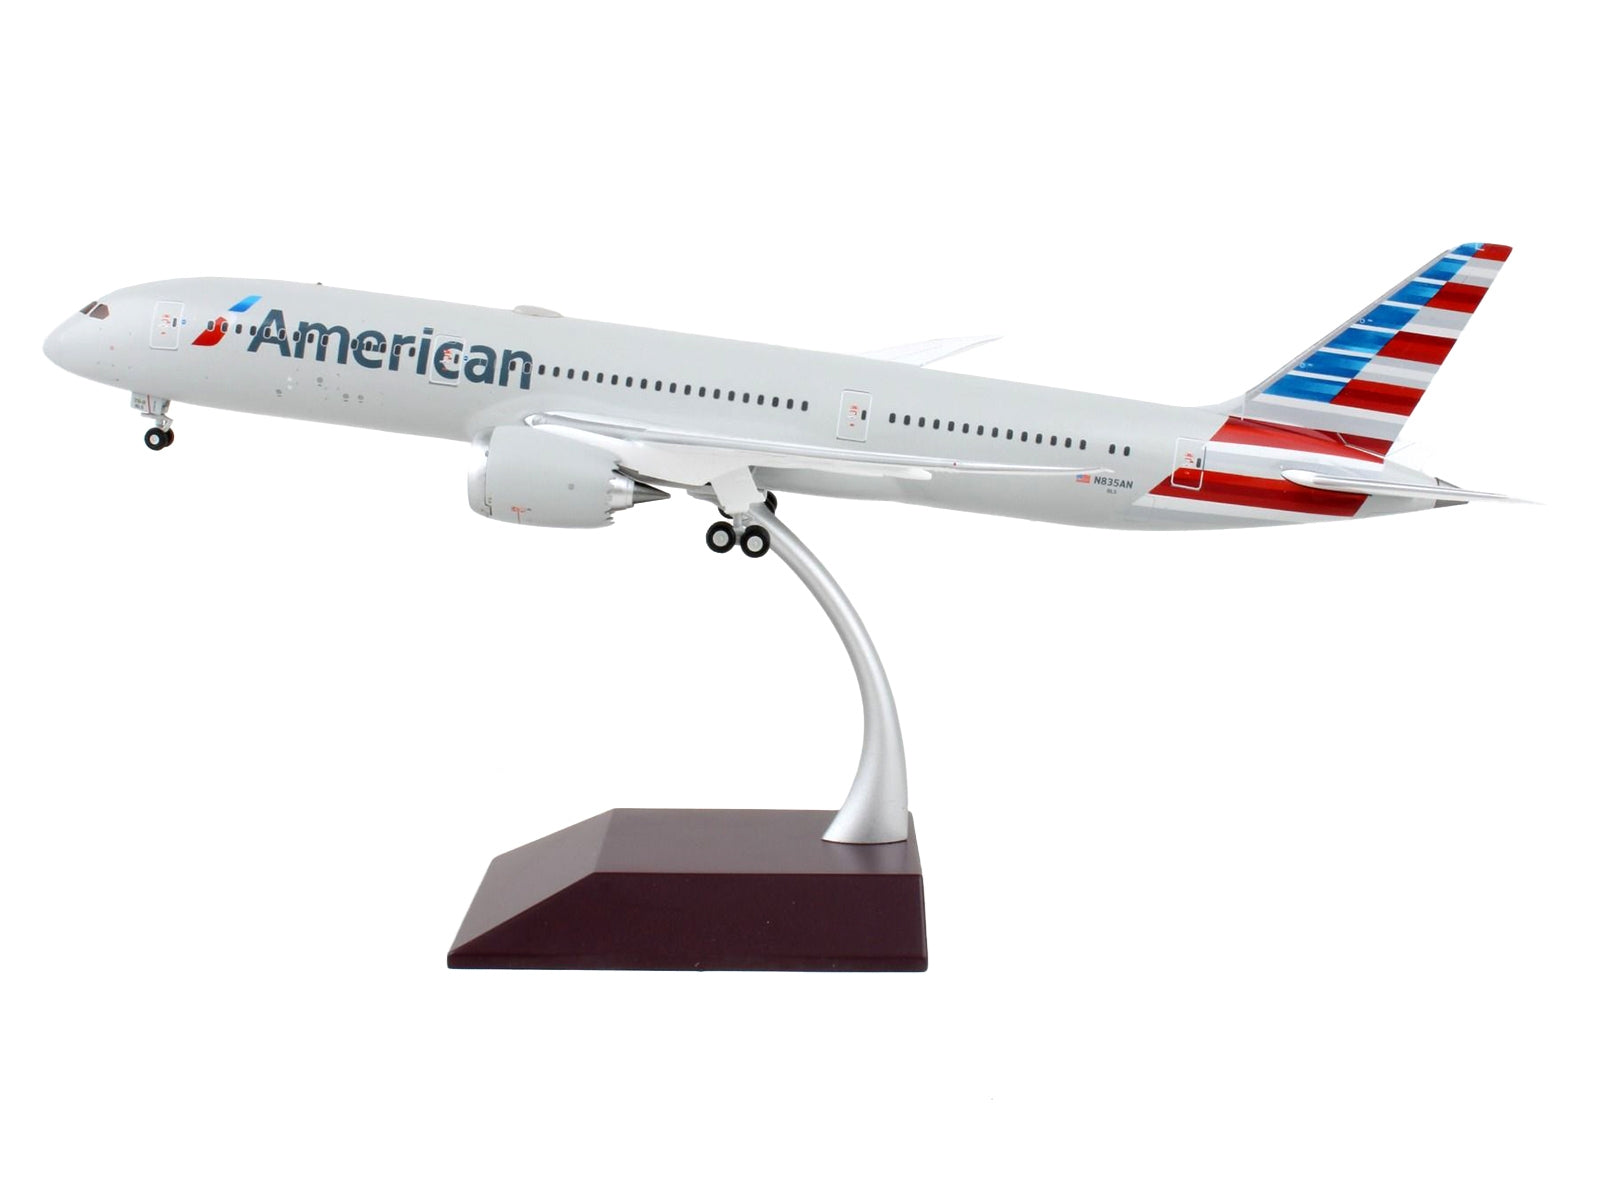 Boeing 787-9 Commercial Aircraft "American Airlines" Silver "Gemini 200" Series 1/200 Diecast Model Airplane by GeminiJets